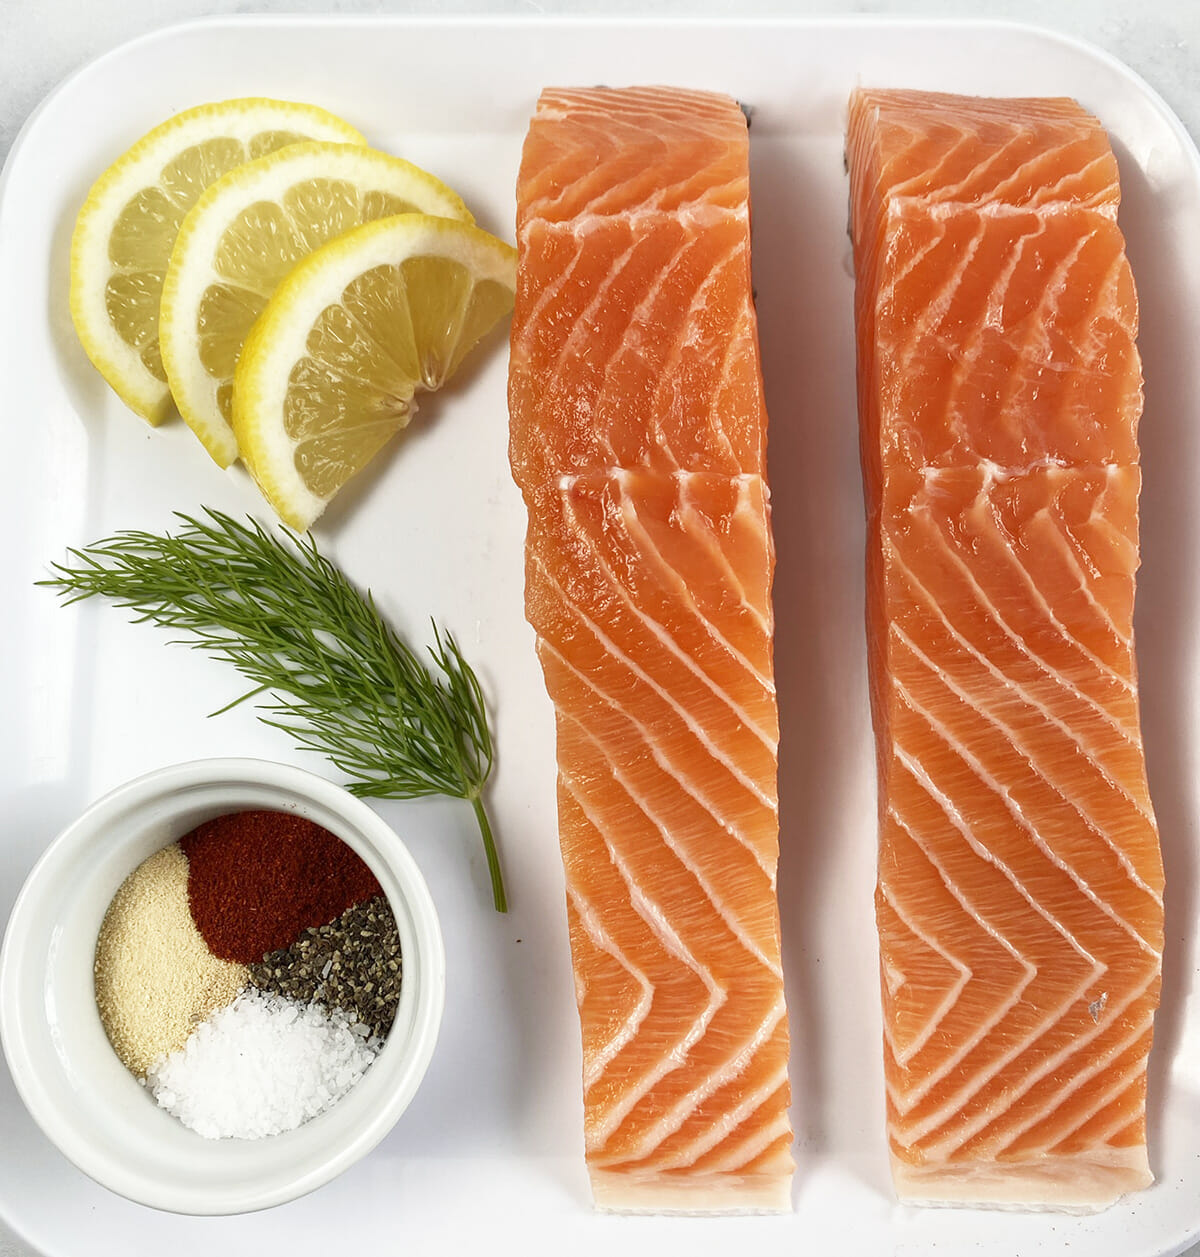 All the ingredients to make easy and delicious George Foreman Grill salmon filets.